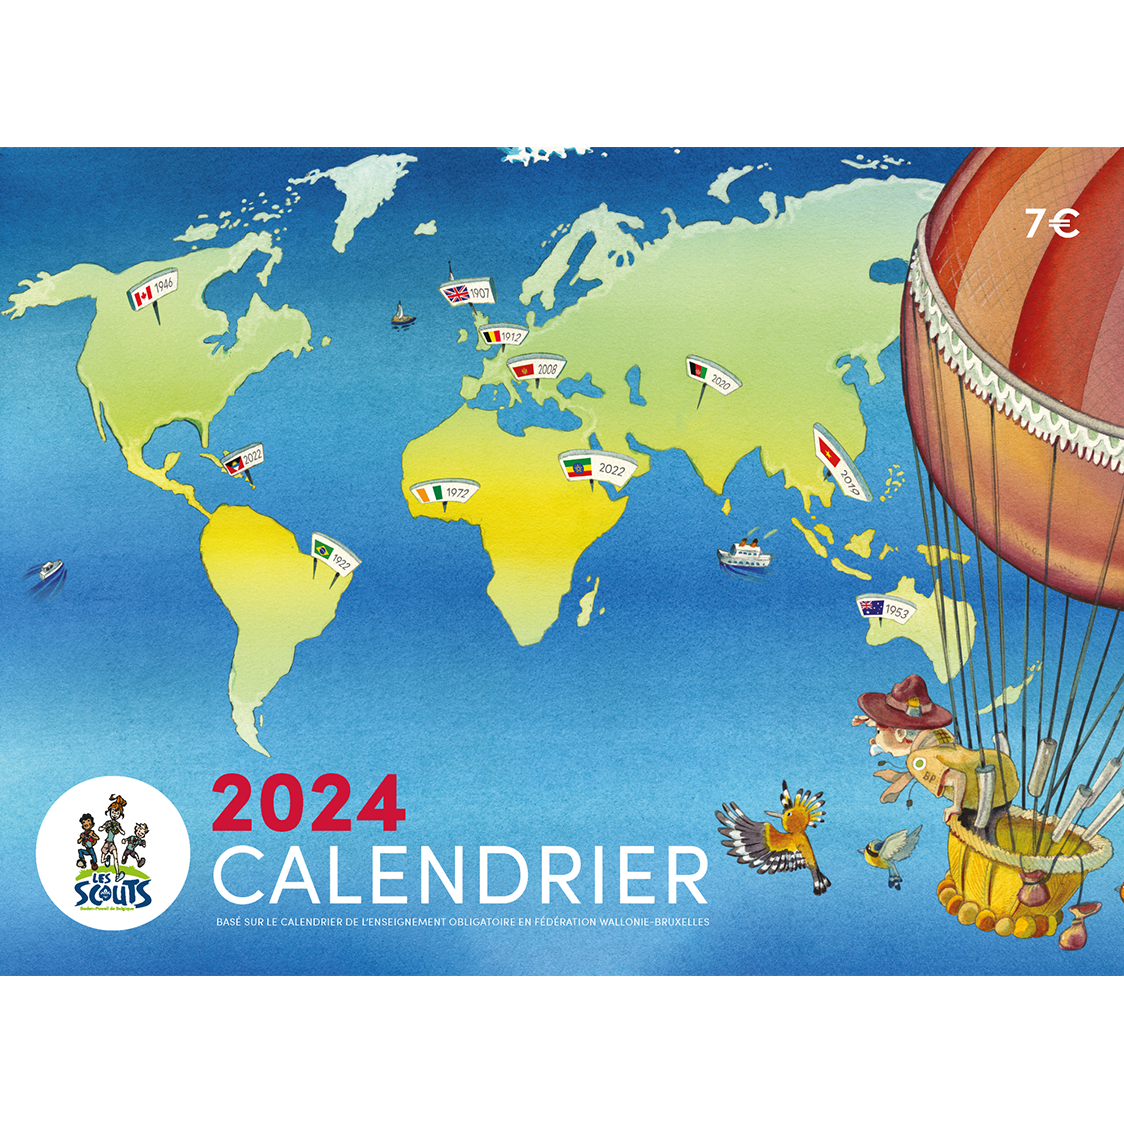 Calendrier scout 2024